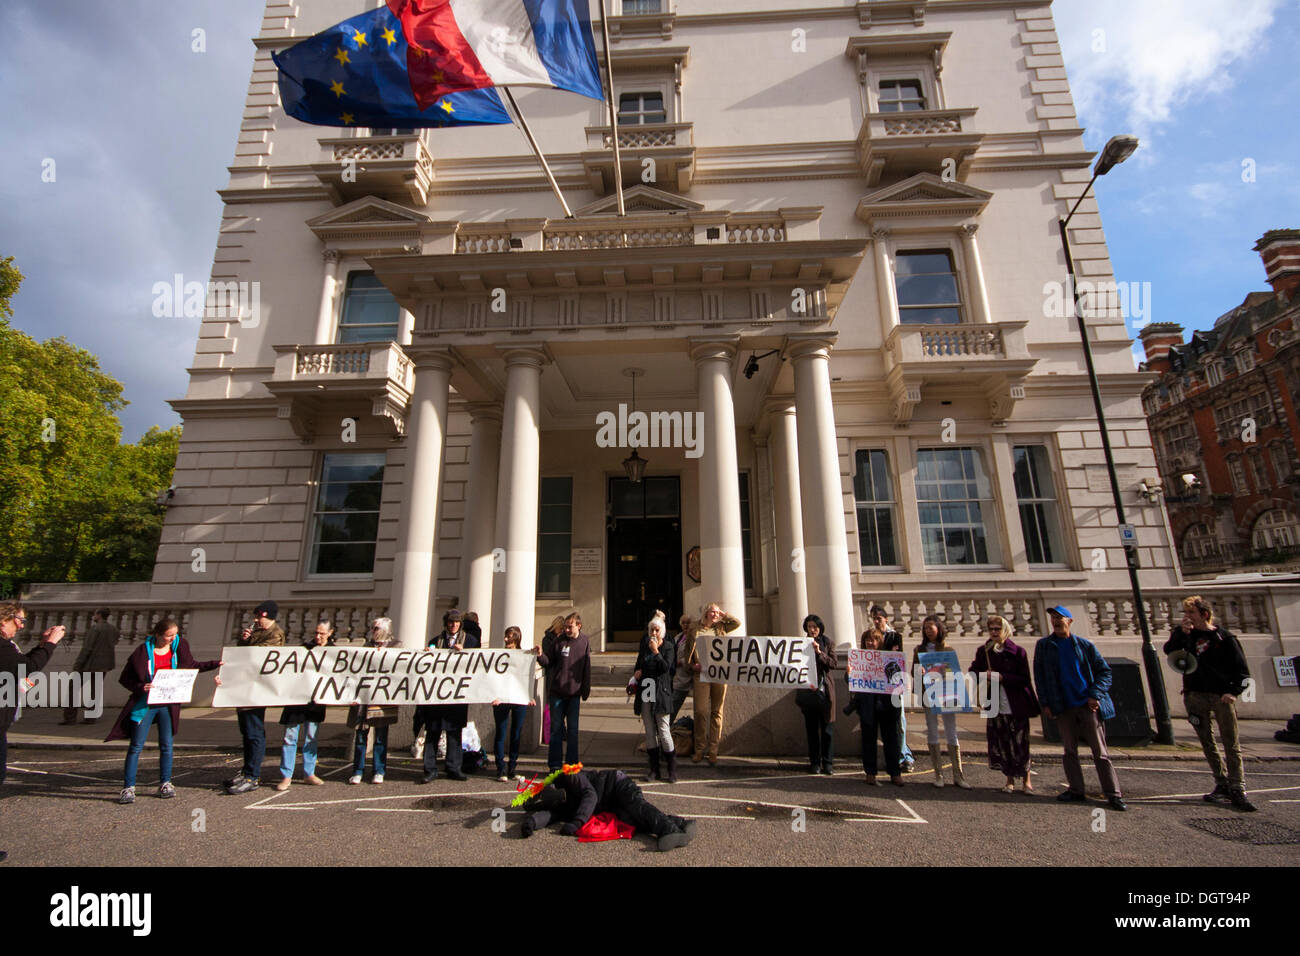 Anti-cruelty activists protest outside the French embassy in London against an upcoming bullfighting event in Rodilhan, France. Stock Photo